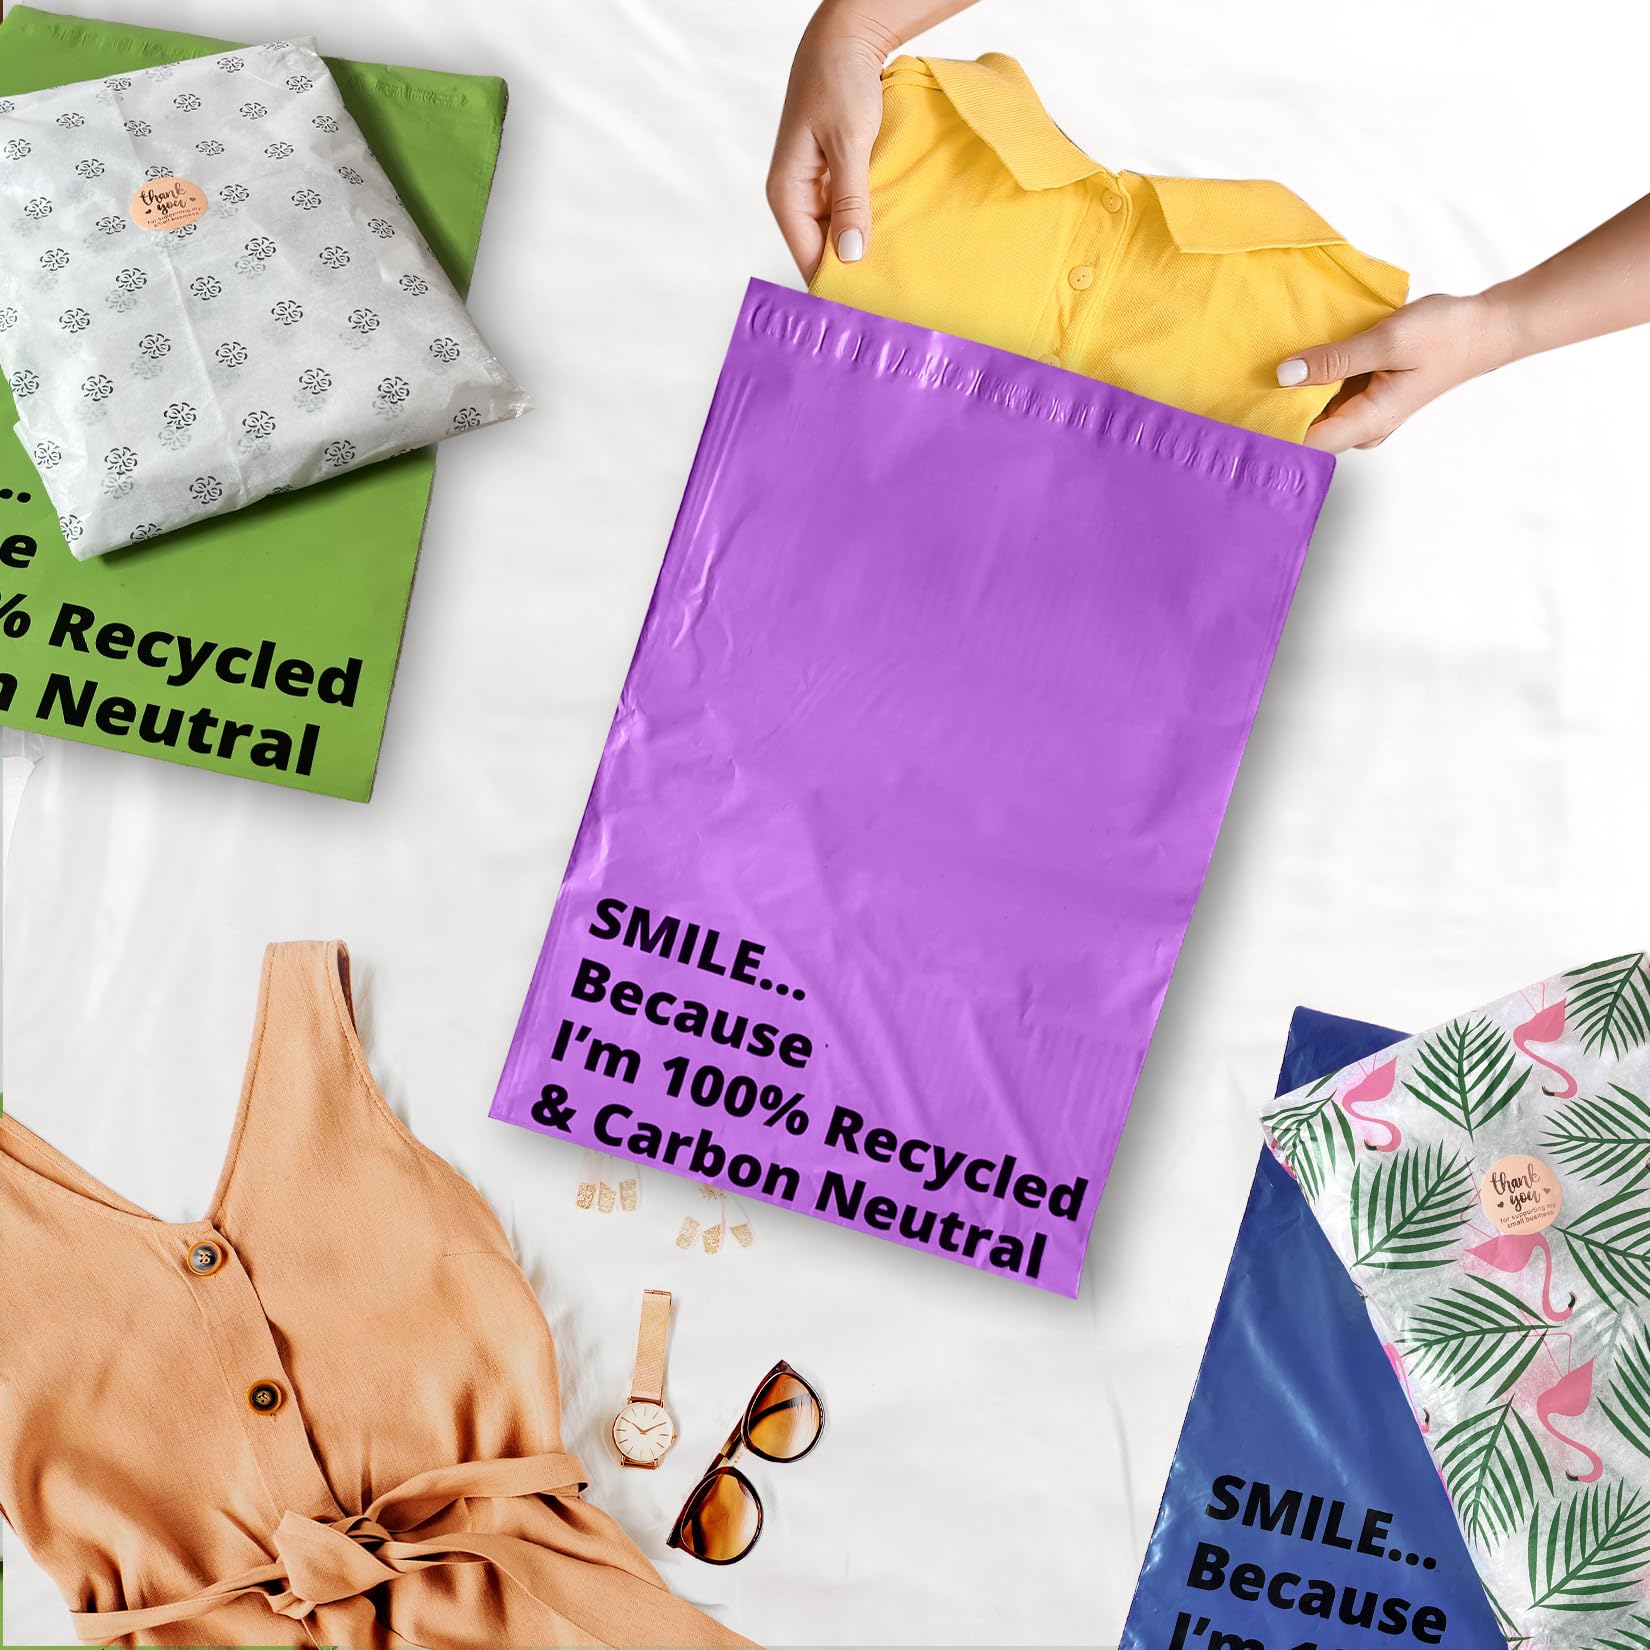 Coloured Postage Bags- Pink Mailing Bags - Green Postage Bags- Blue Parcel Bags- Purple Mailing Bags (12 inches x 16 inches (30cm x 40cm), Pink, 10)